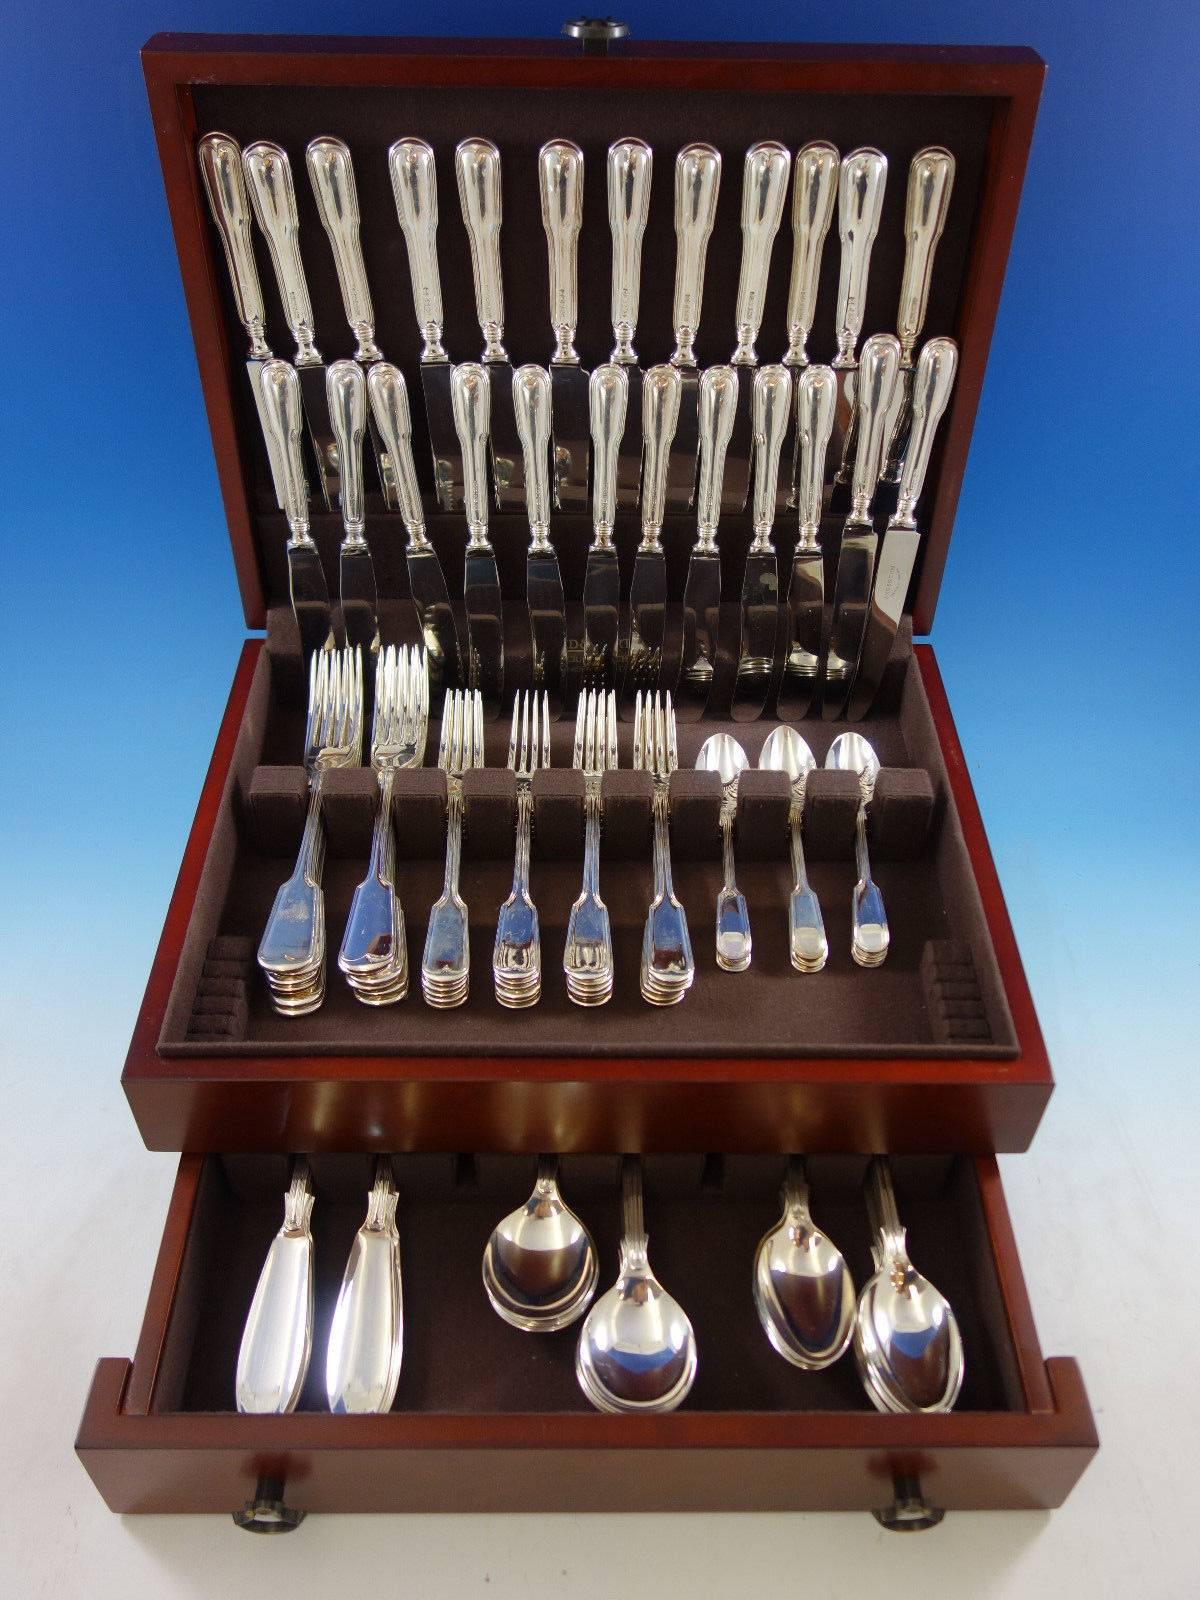 Fiddle & Thread by Argentum sterling silver flatware set, 108 pieces. This set includes: 

12 dinner size knives, 9 5/8